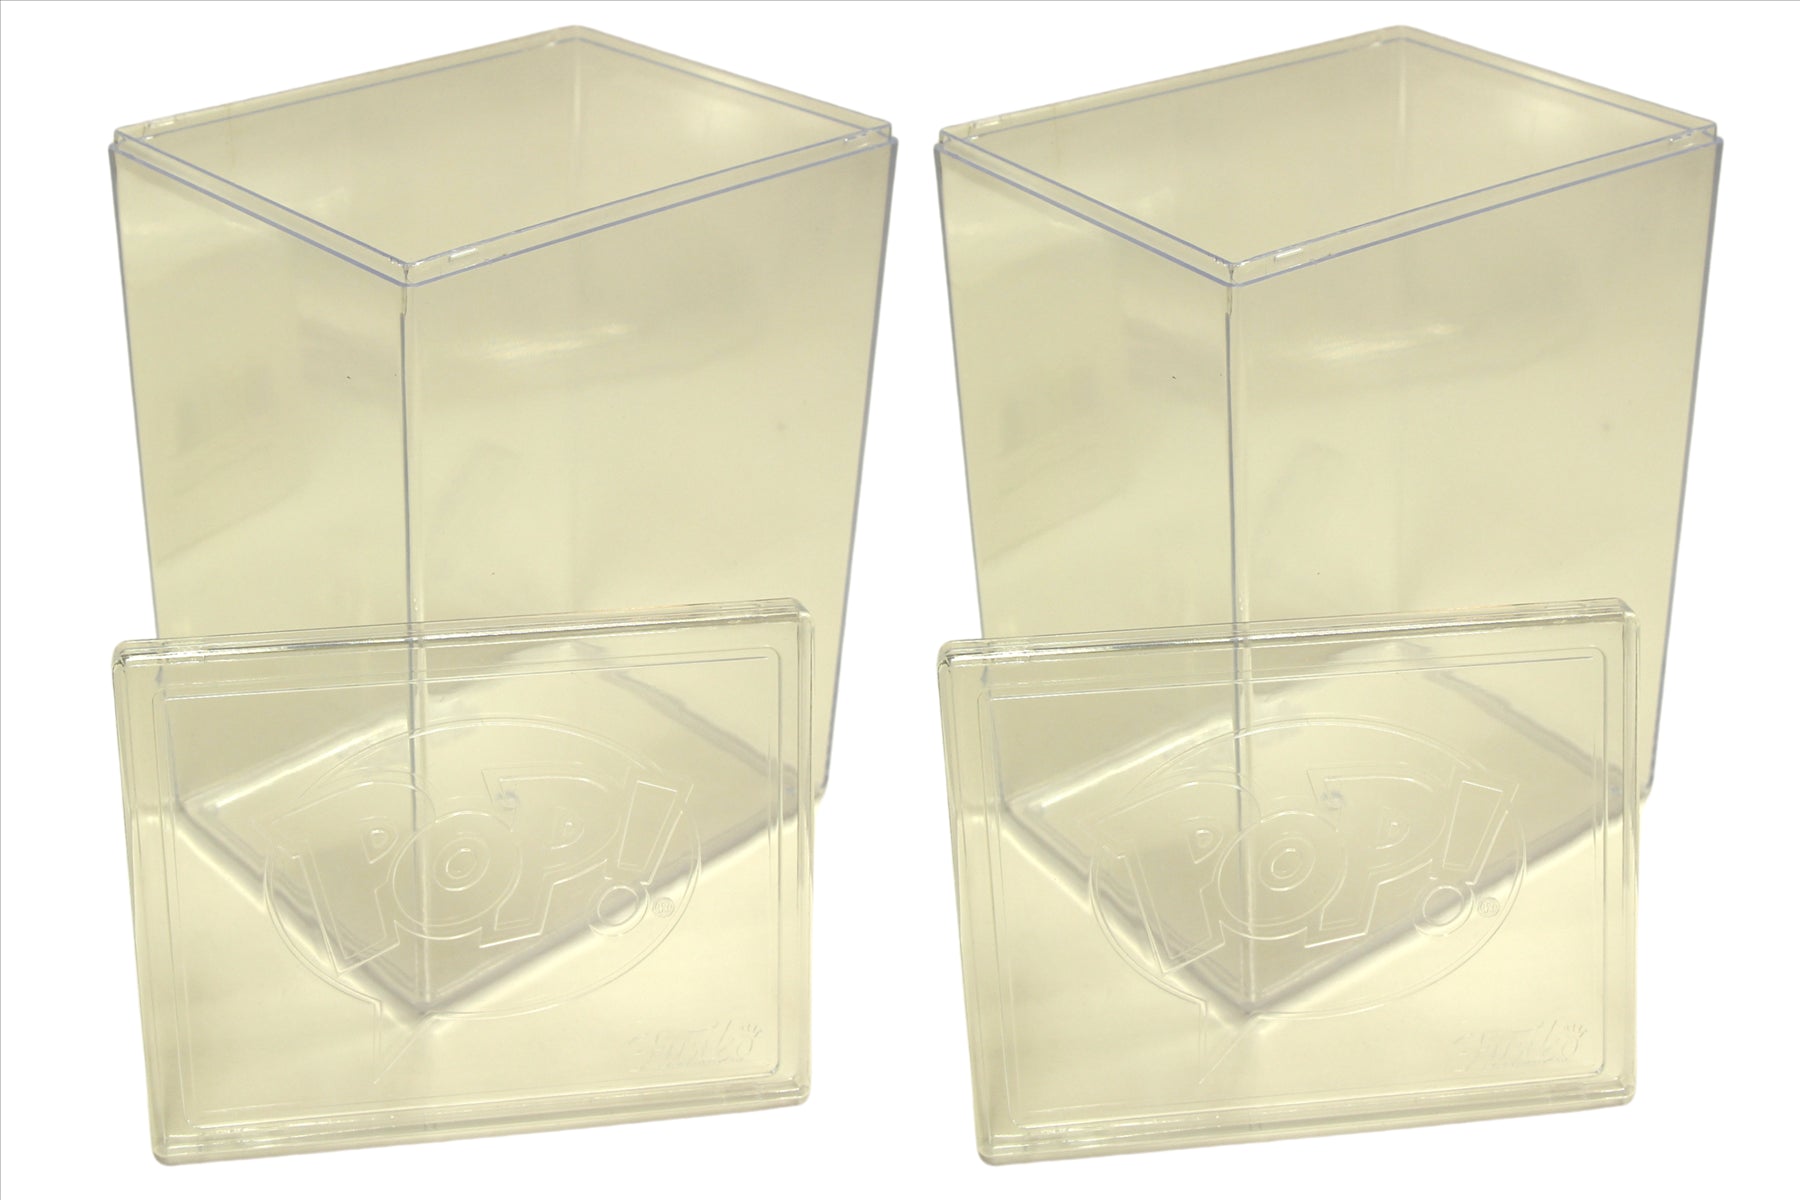 Funko Pop Vinyl Officially Licenced Thick Protective Clear Acrylic Case - Pack of 2 - Toptoys2u